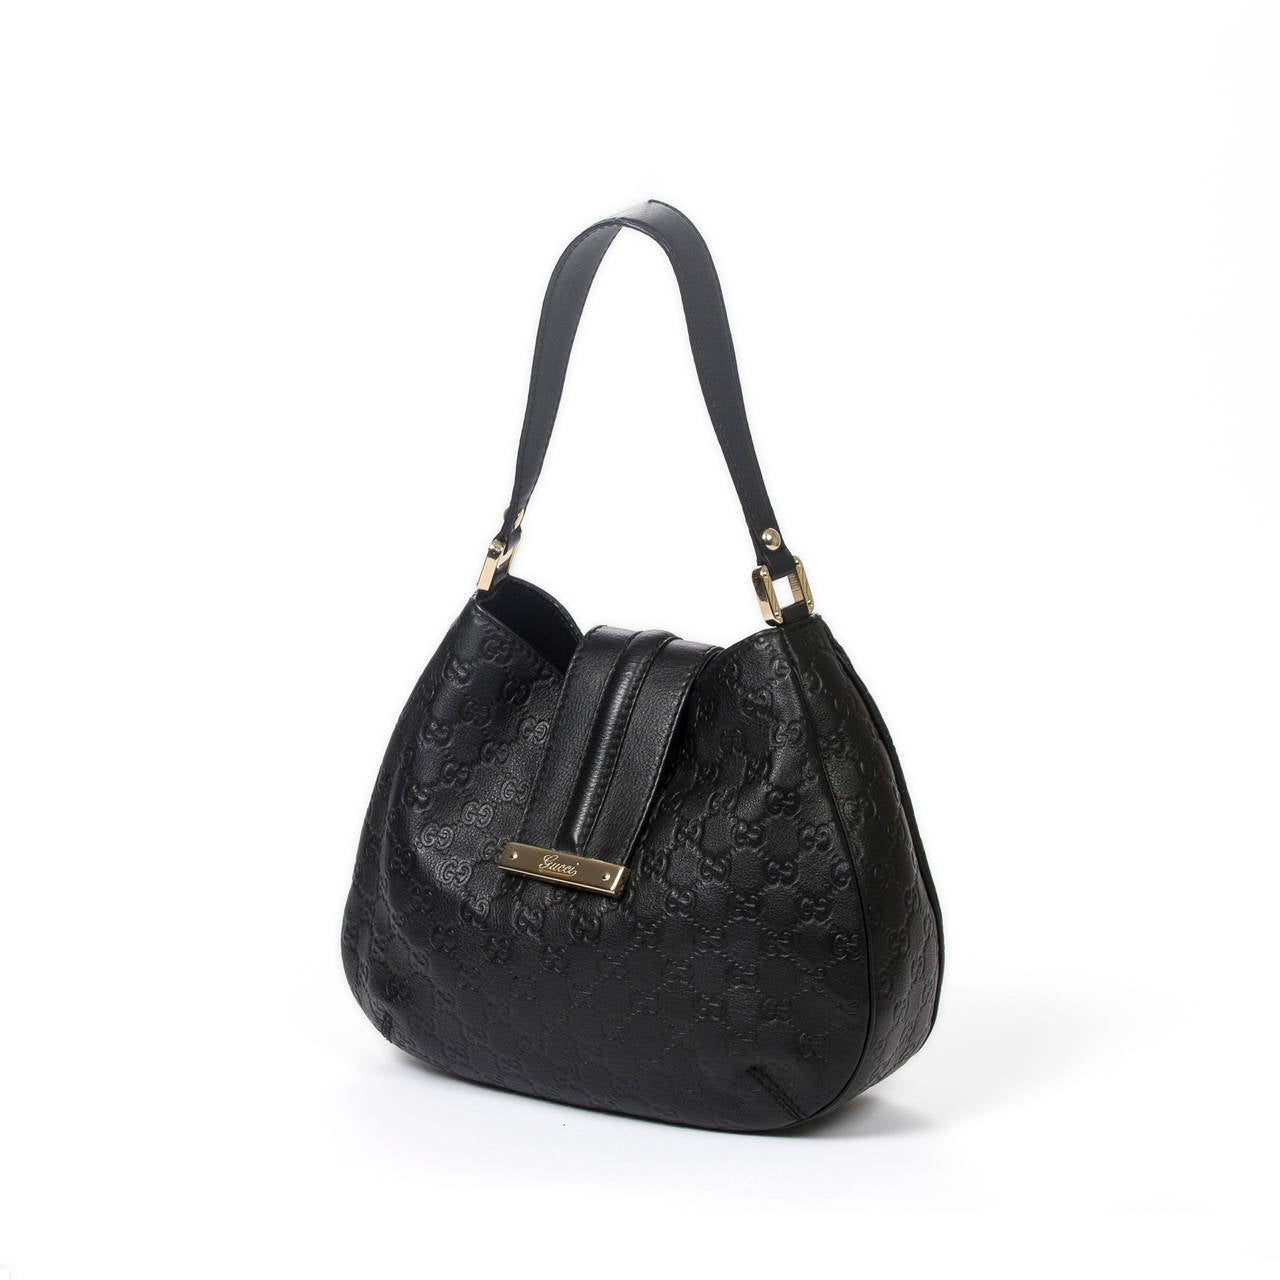 Gucci Handbag in black monogrammed leather with light gold hardware. Lined interior in black canvas monogram. Perfect condition.